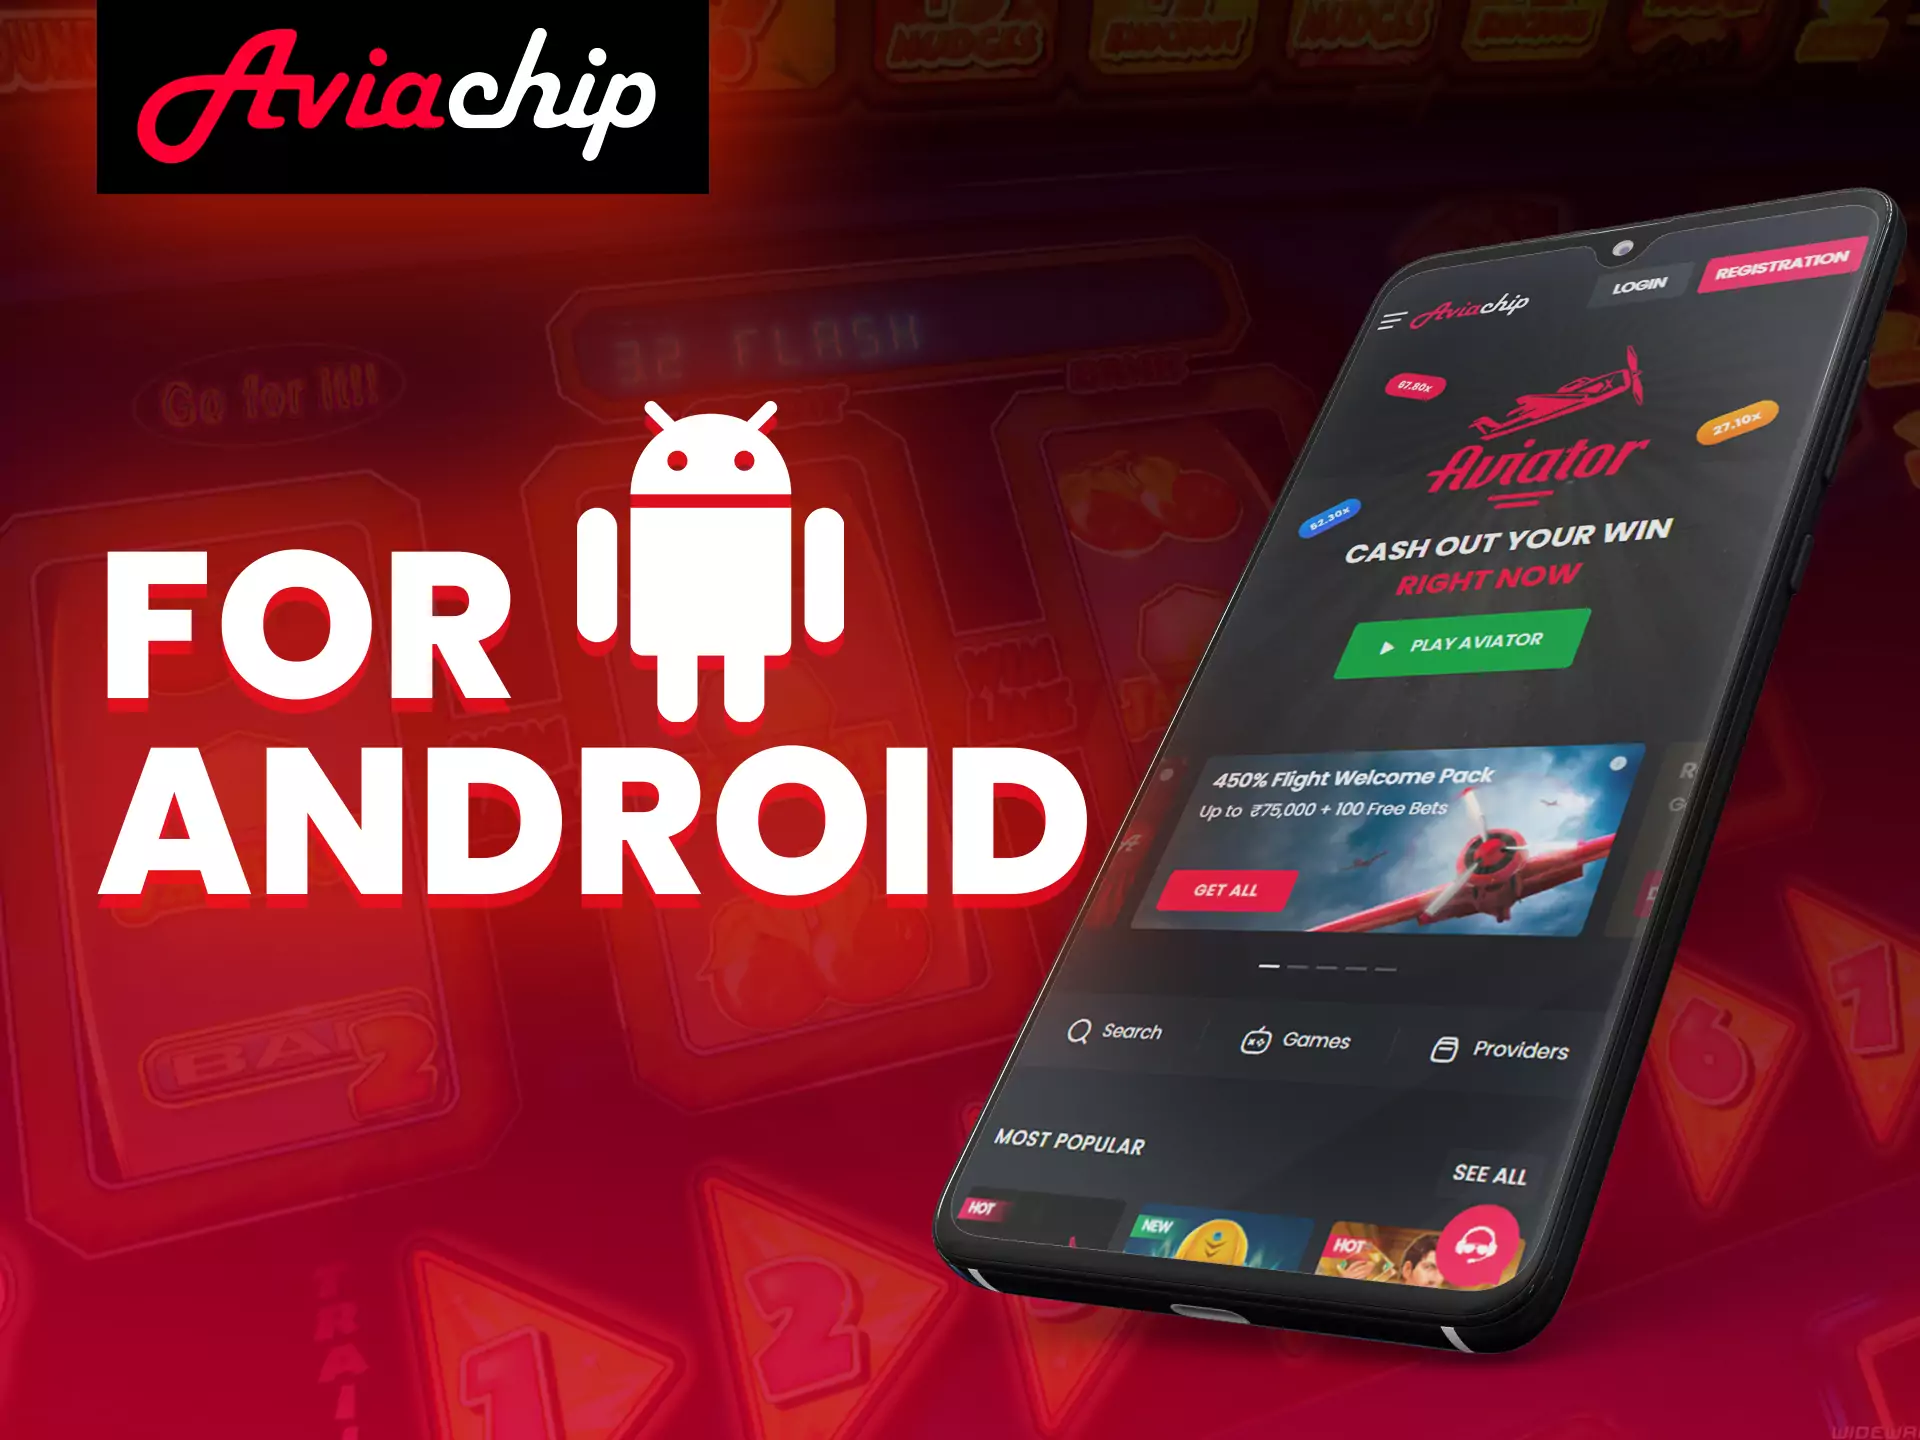 You can install Aviachip on your Android device.